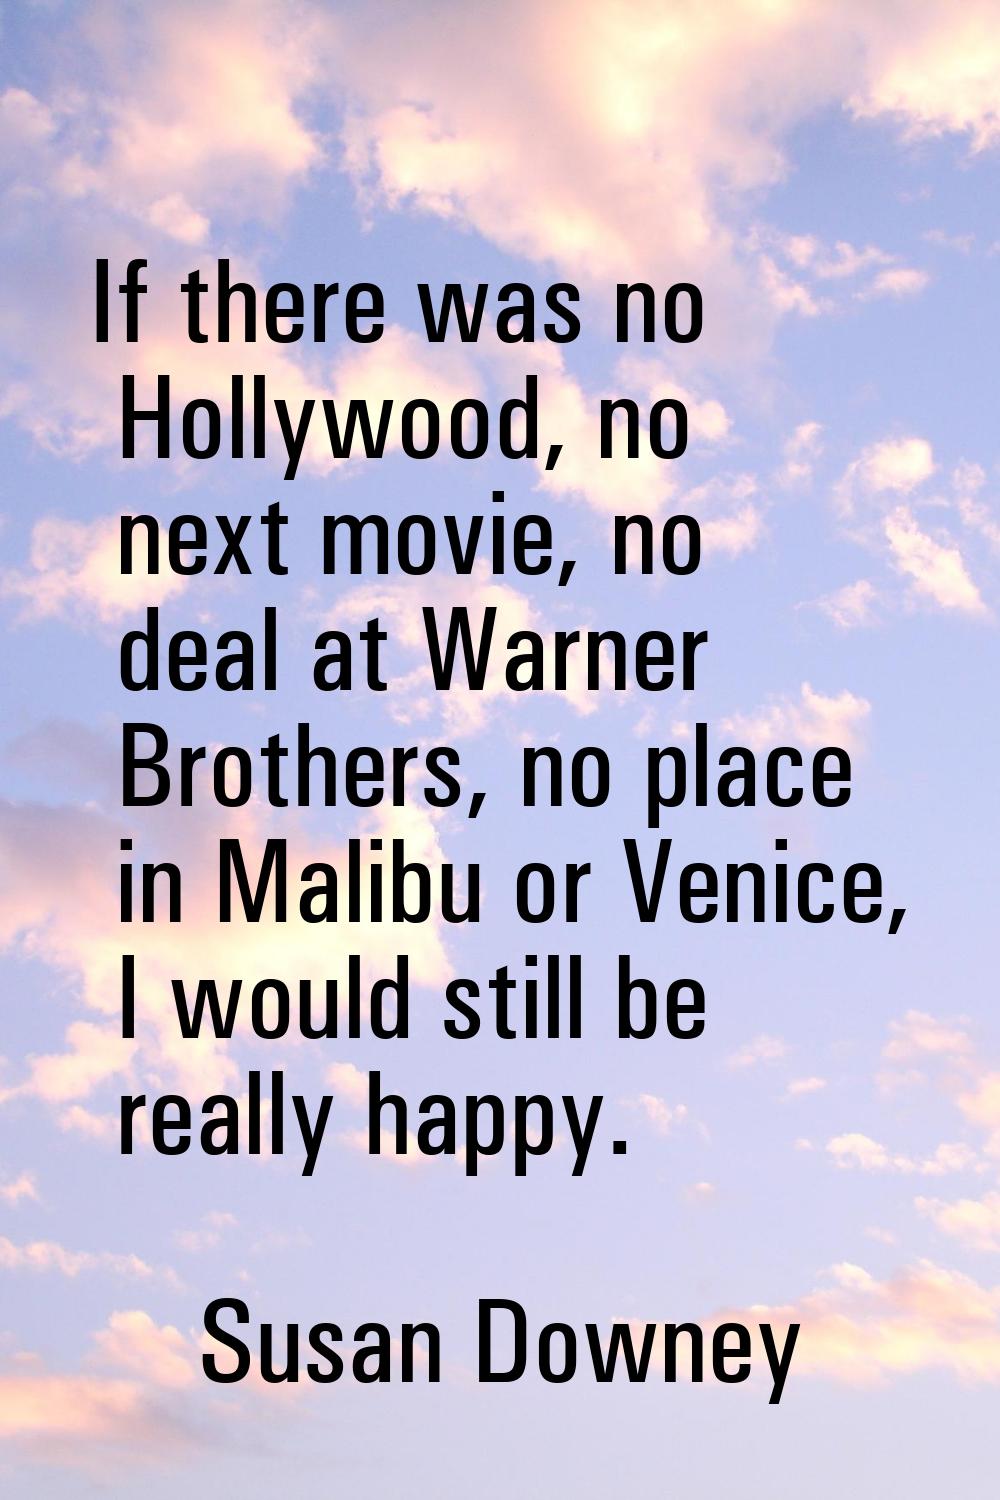 If there was no Hollywood, no next movie, no deal at Warner Brothers, no place in Malibu or Venice,